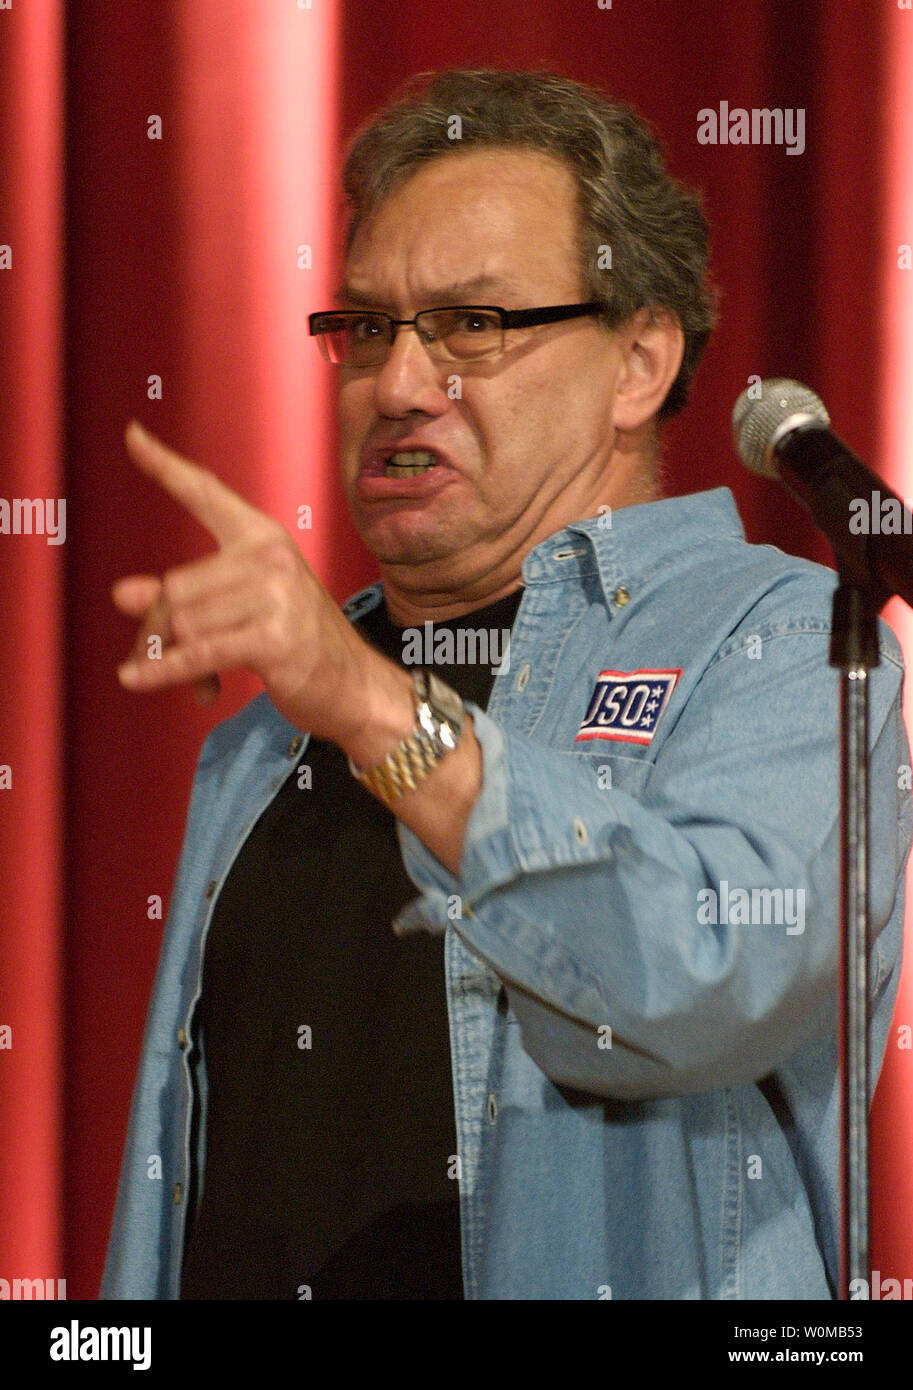 Comedian Lewis Black performs for troops on USO Tour at the Marine Corps Air Station Miramar in San Diego, California on August 15, 2007. (UPI Photo/Dave Gatley/USO) Stock Photo